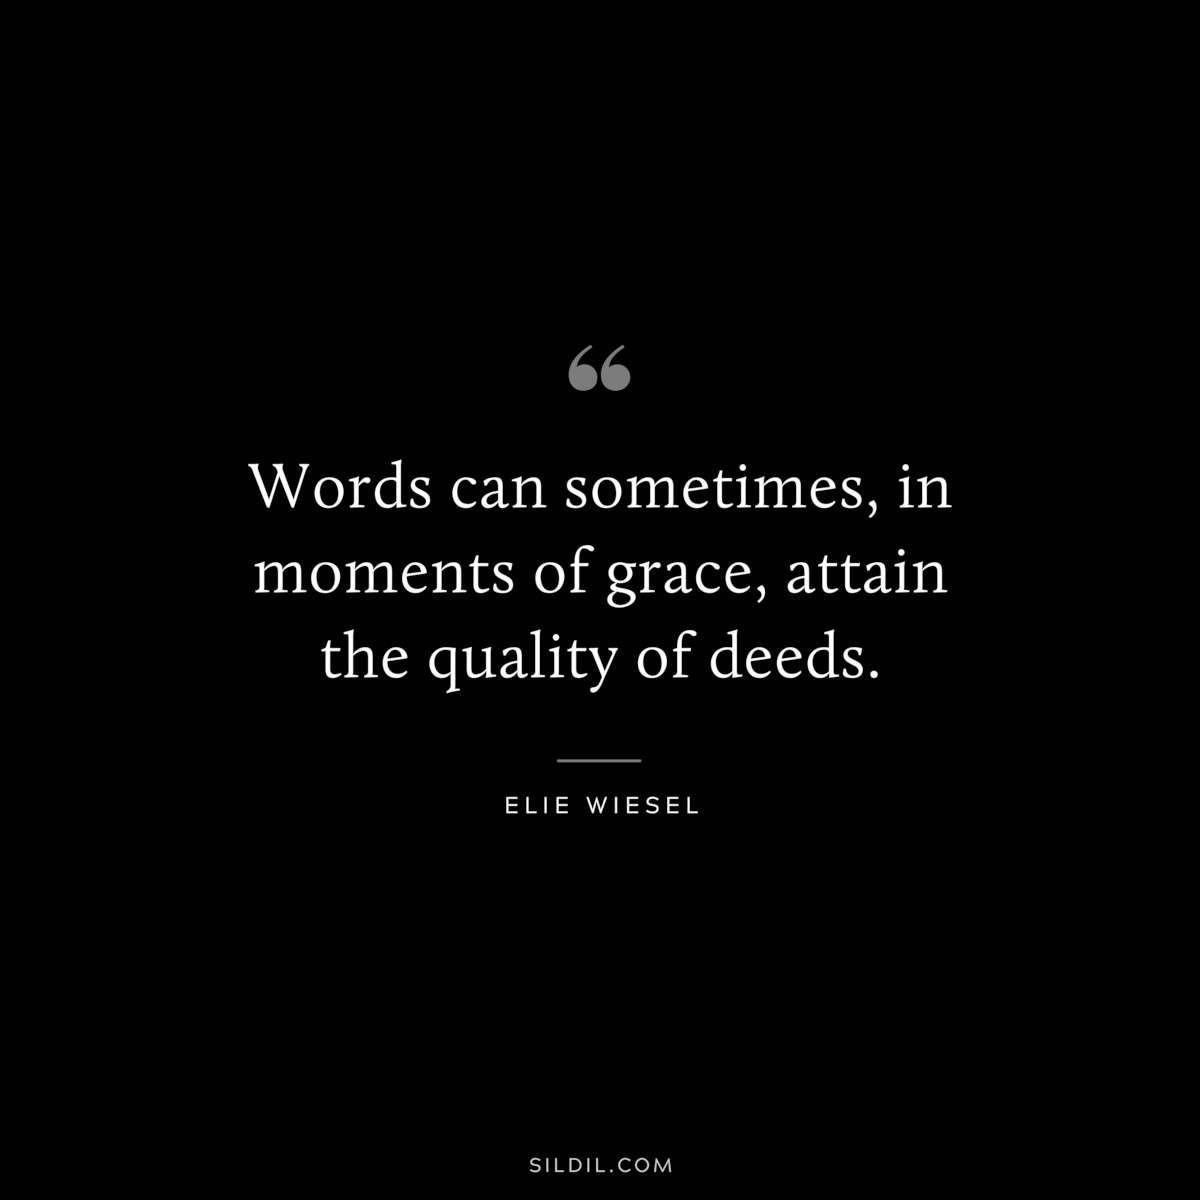 Words can sometimes, in moments of grace, attain the quality of deeds. ― Elie Wiesel